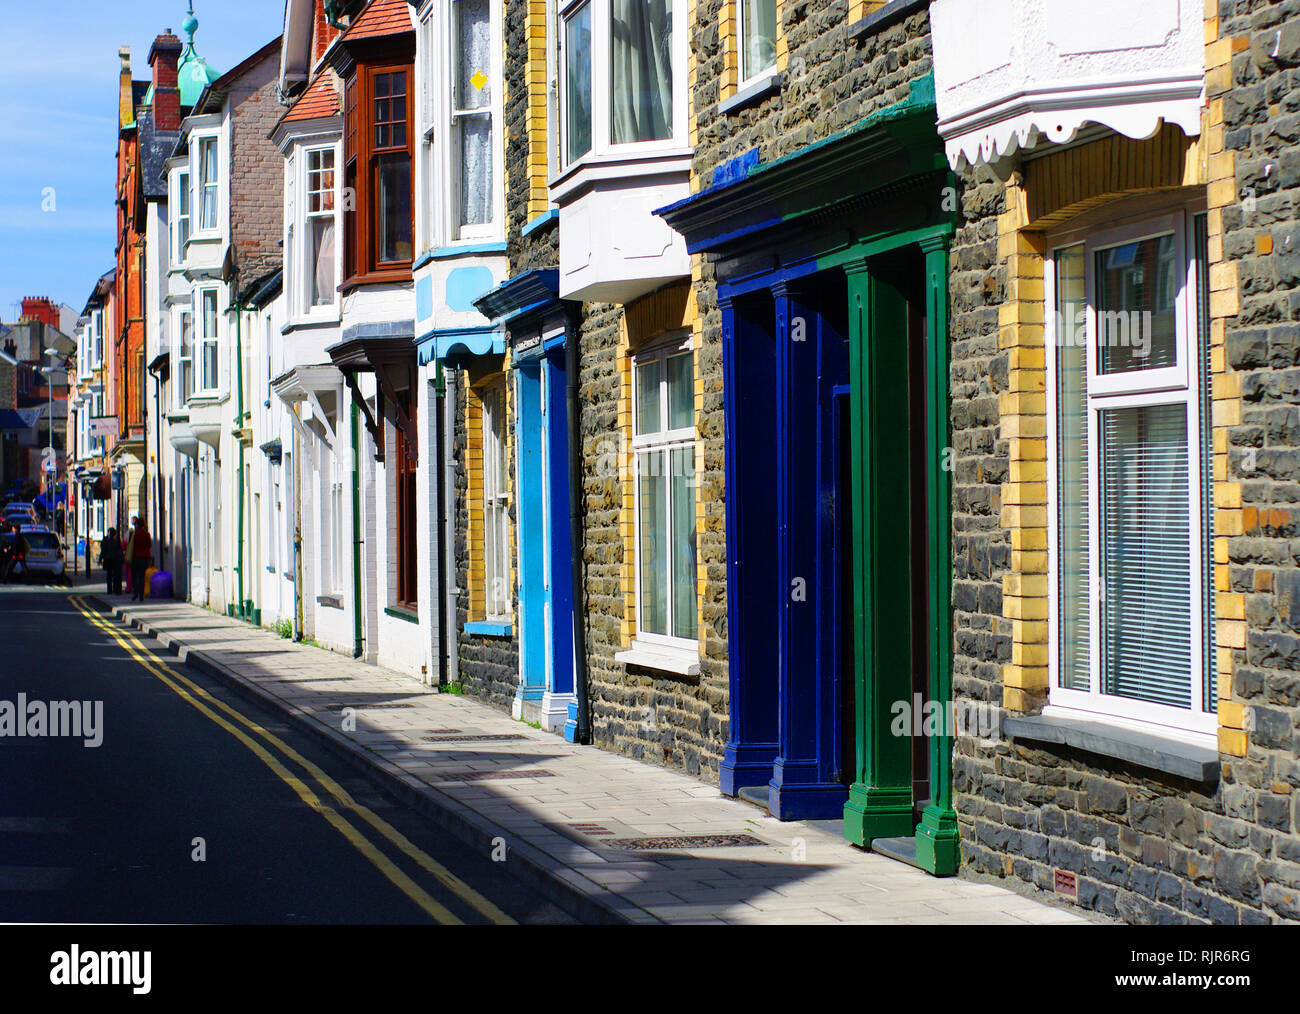 Colorful Welsh Homes on a main street Stock Photo